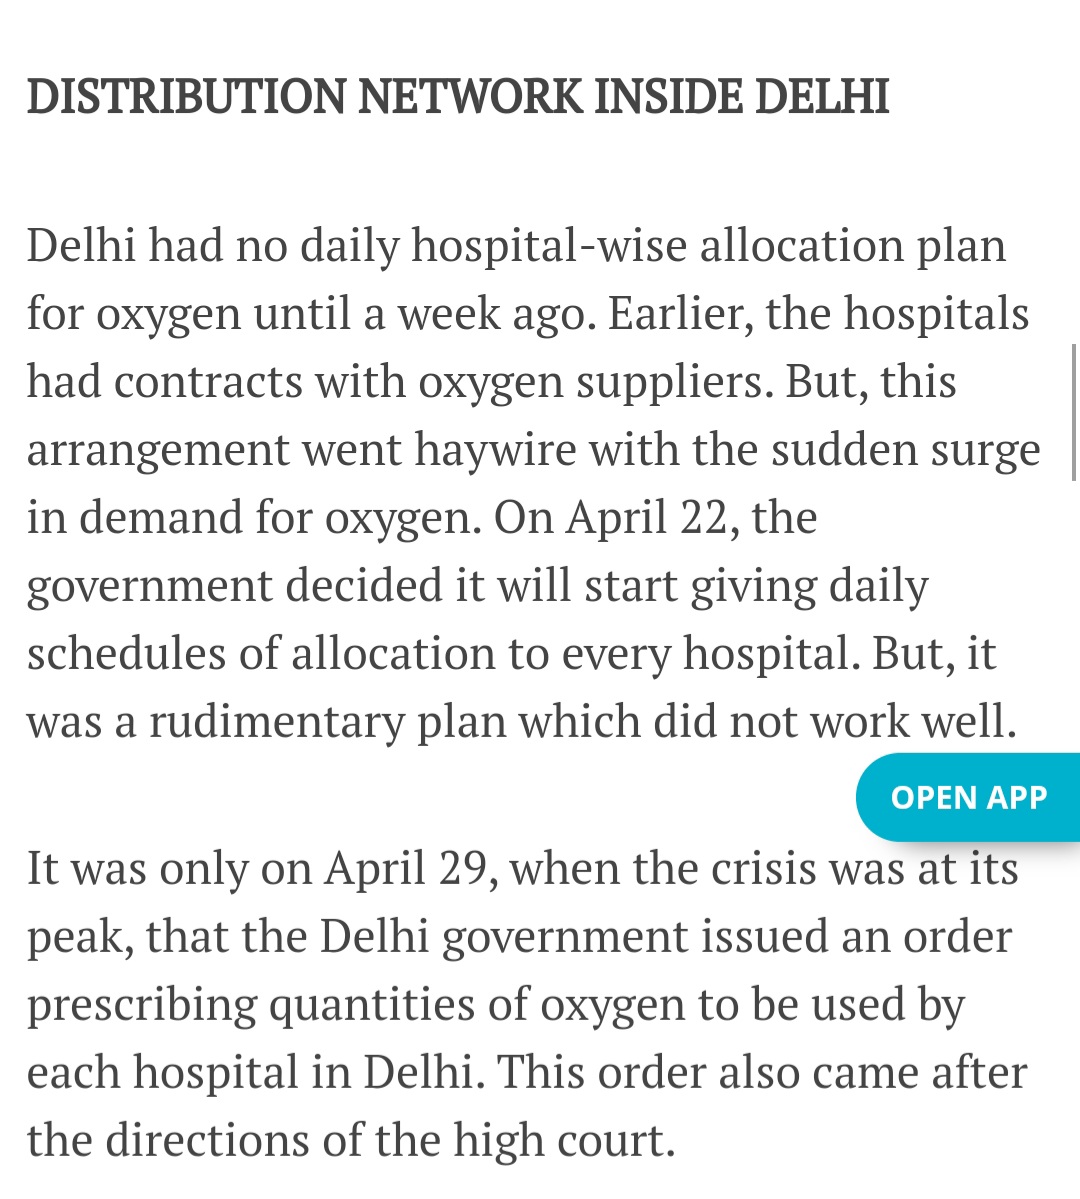 Coming to supply chain Kejriwal had no plan to distribute oxygen that was allotted to him. Source:  @HindustanTimes